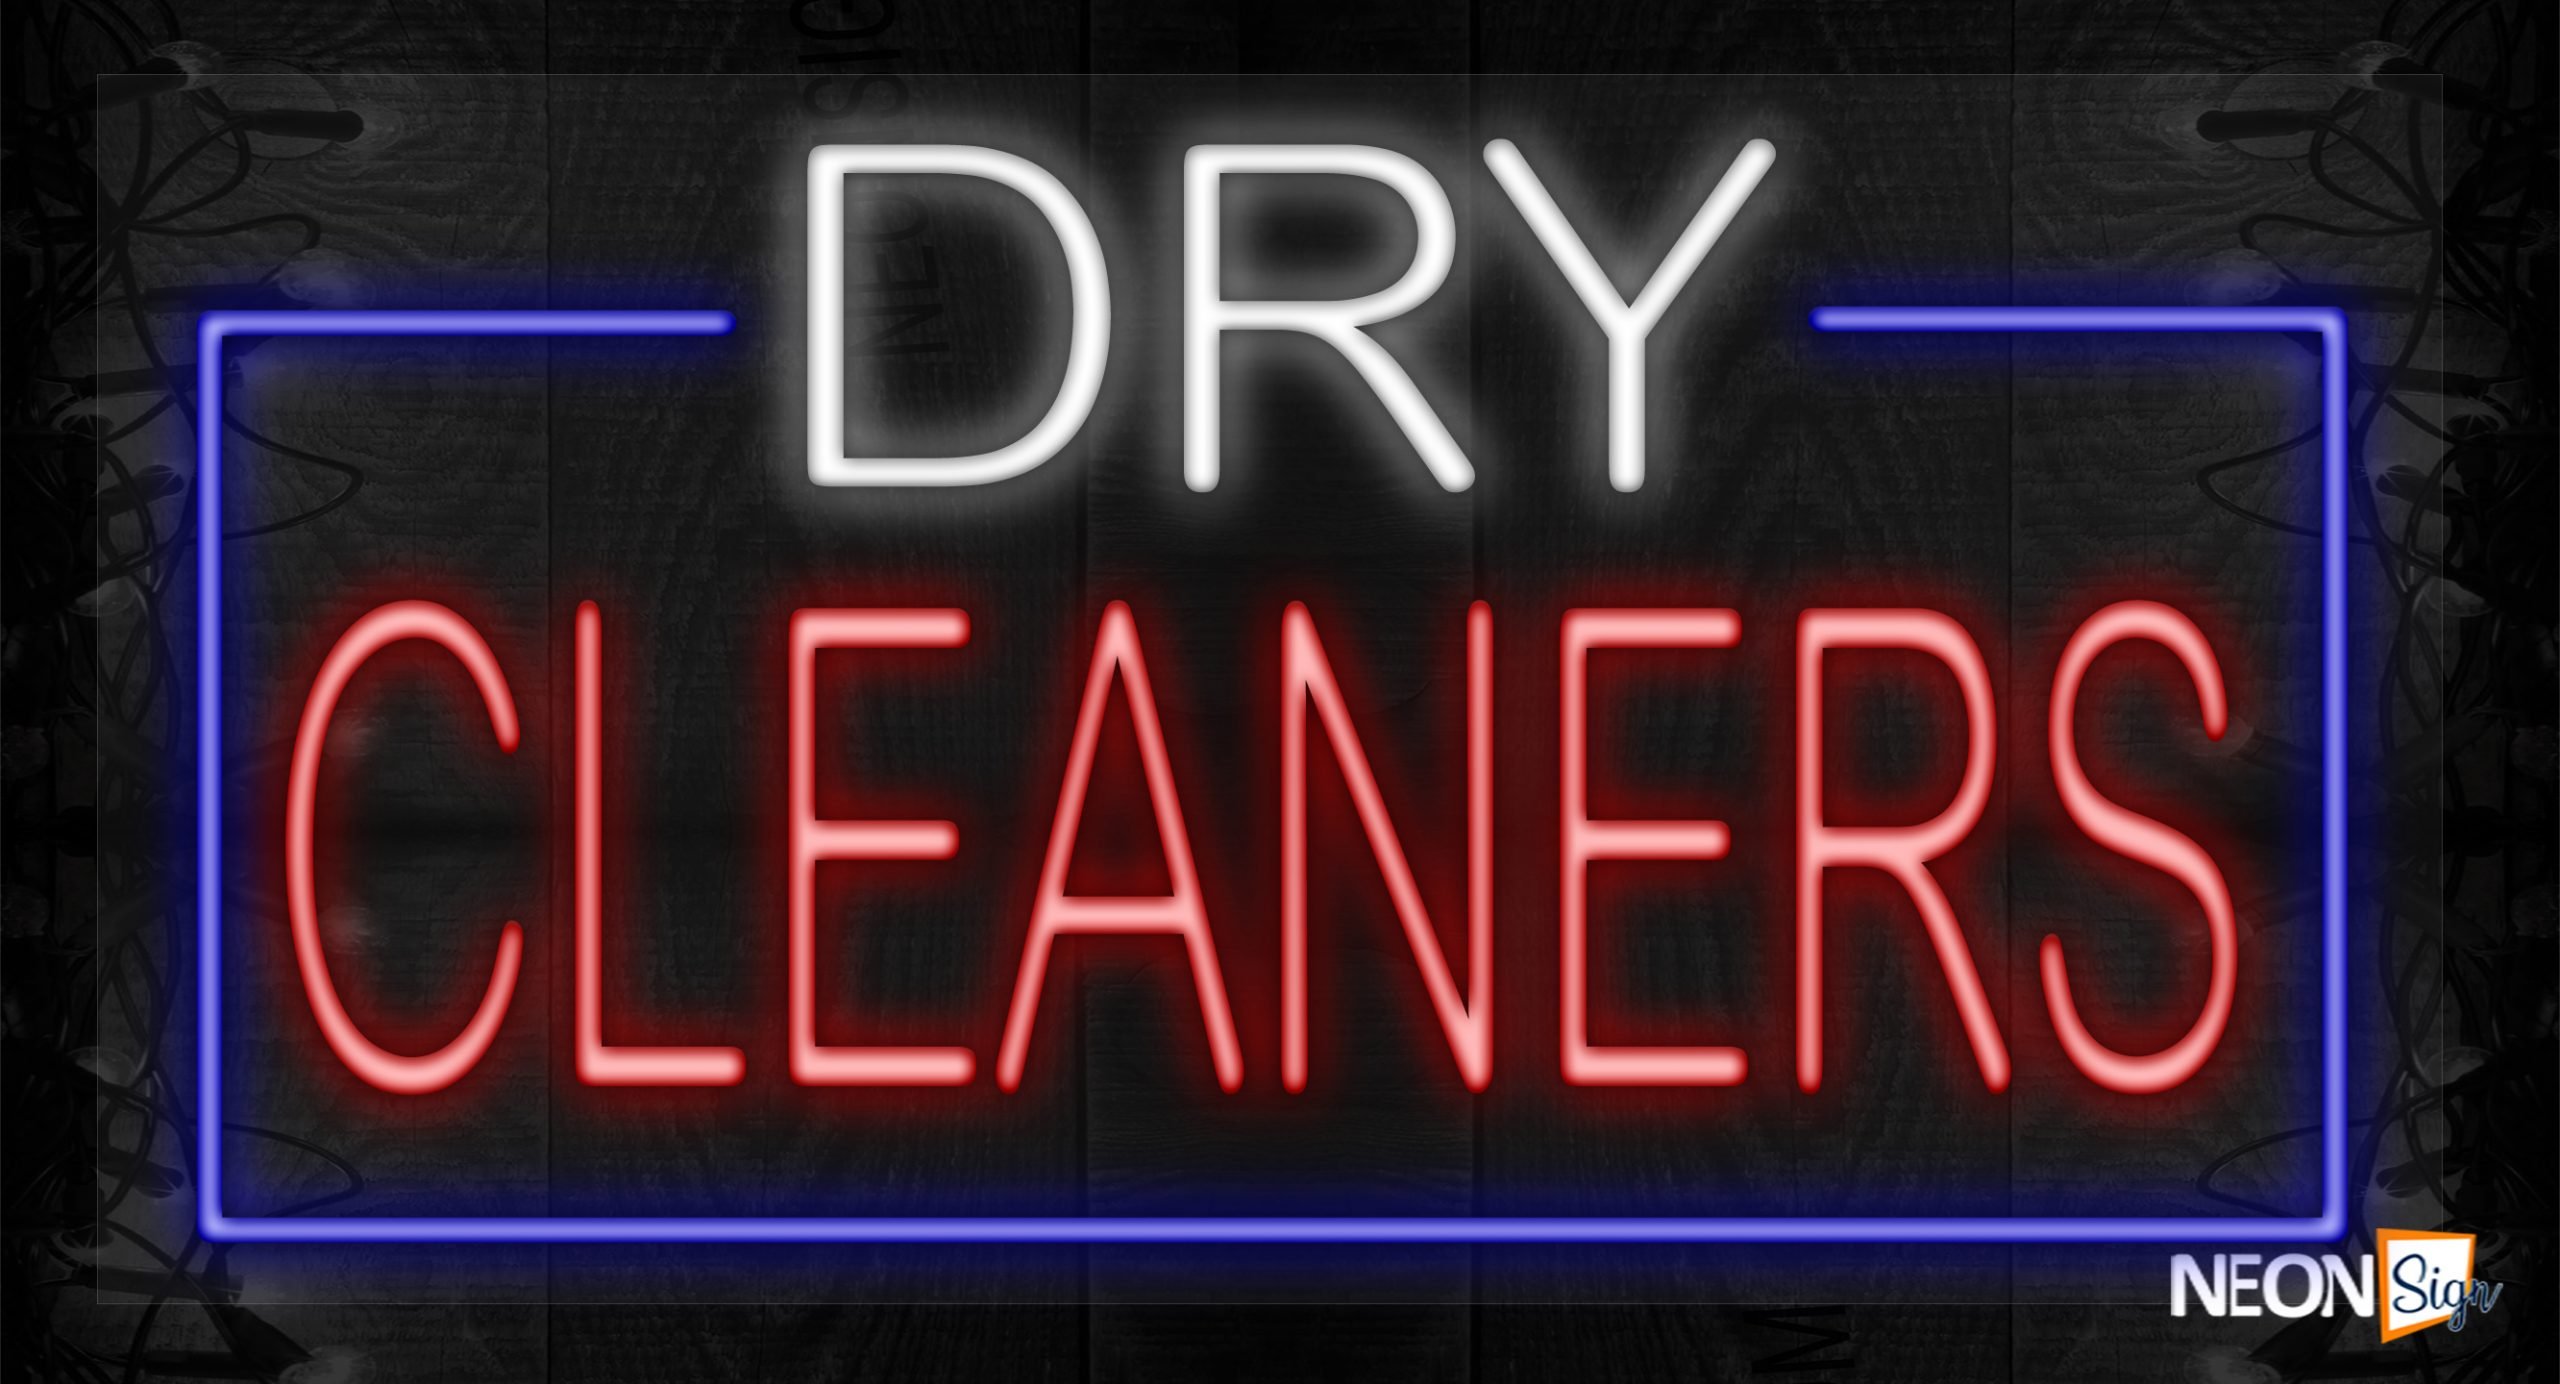 Image of Dry Cleanerss in white and red with blue border LED Flex